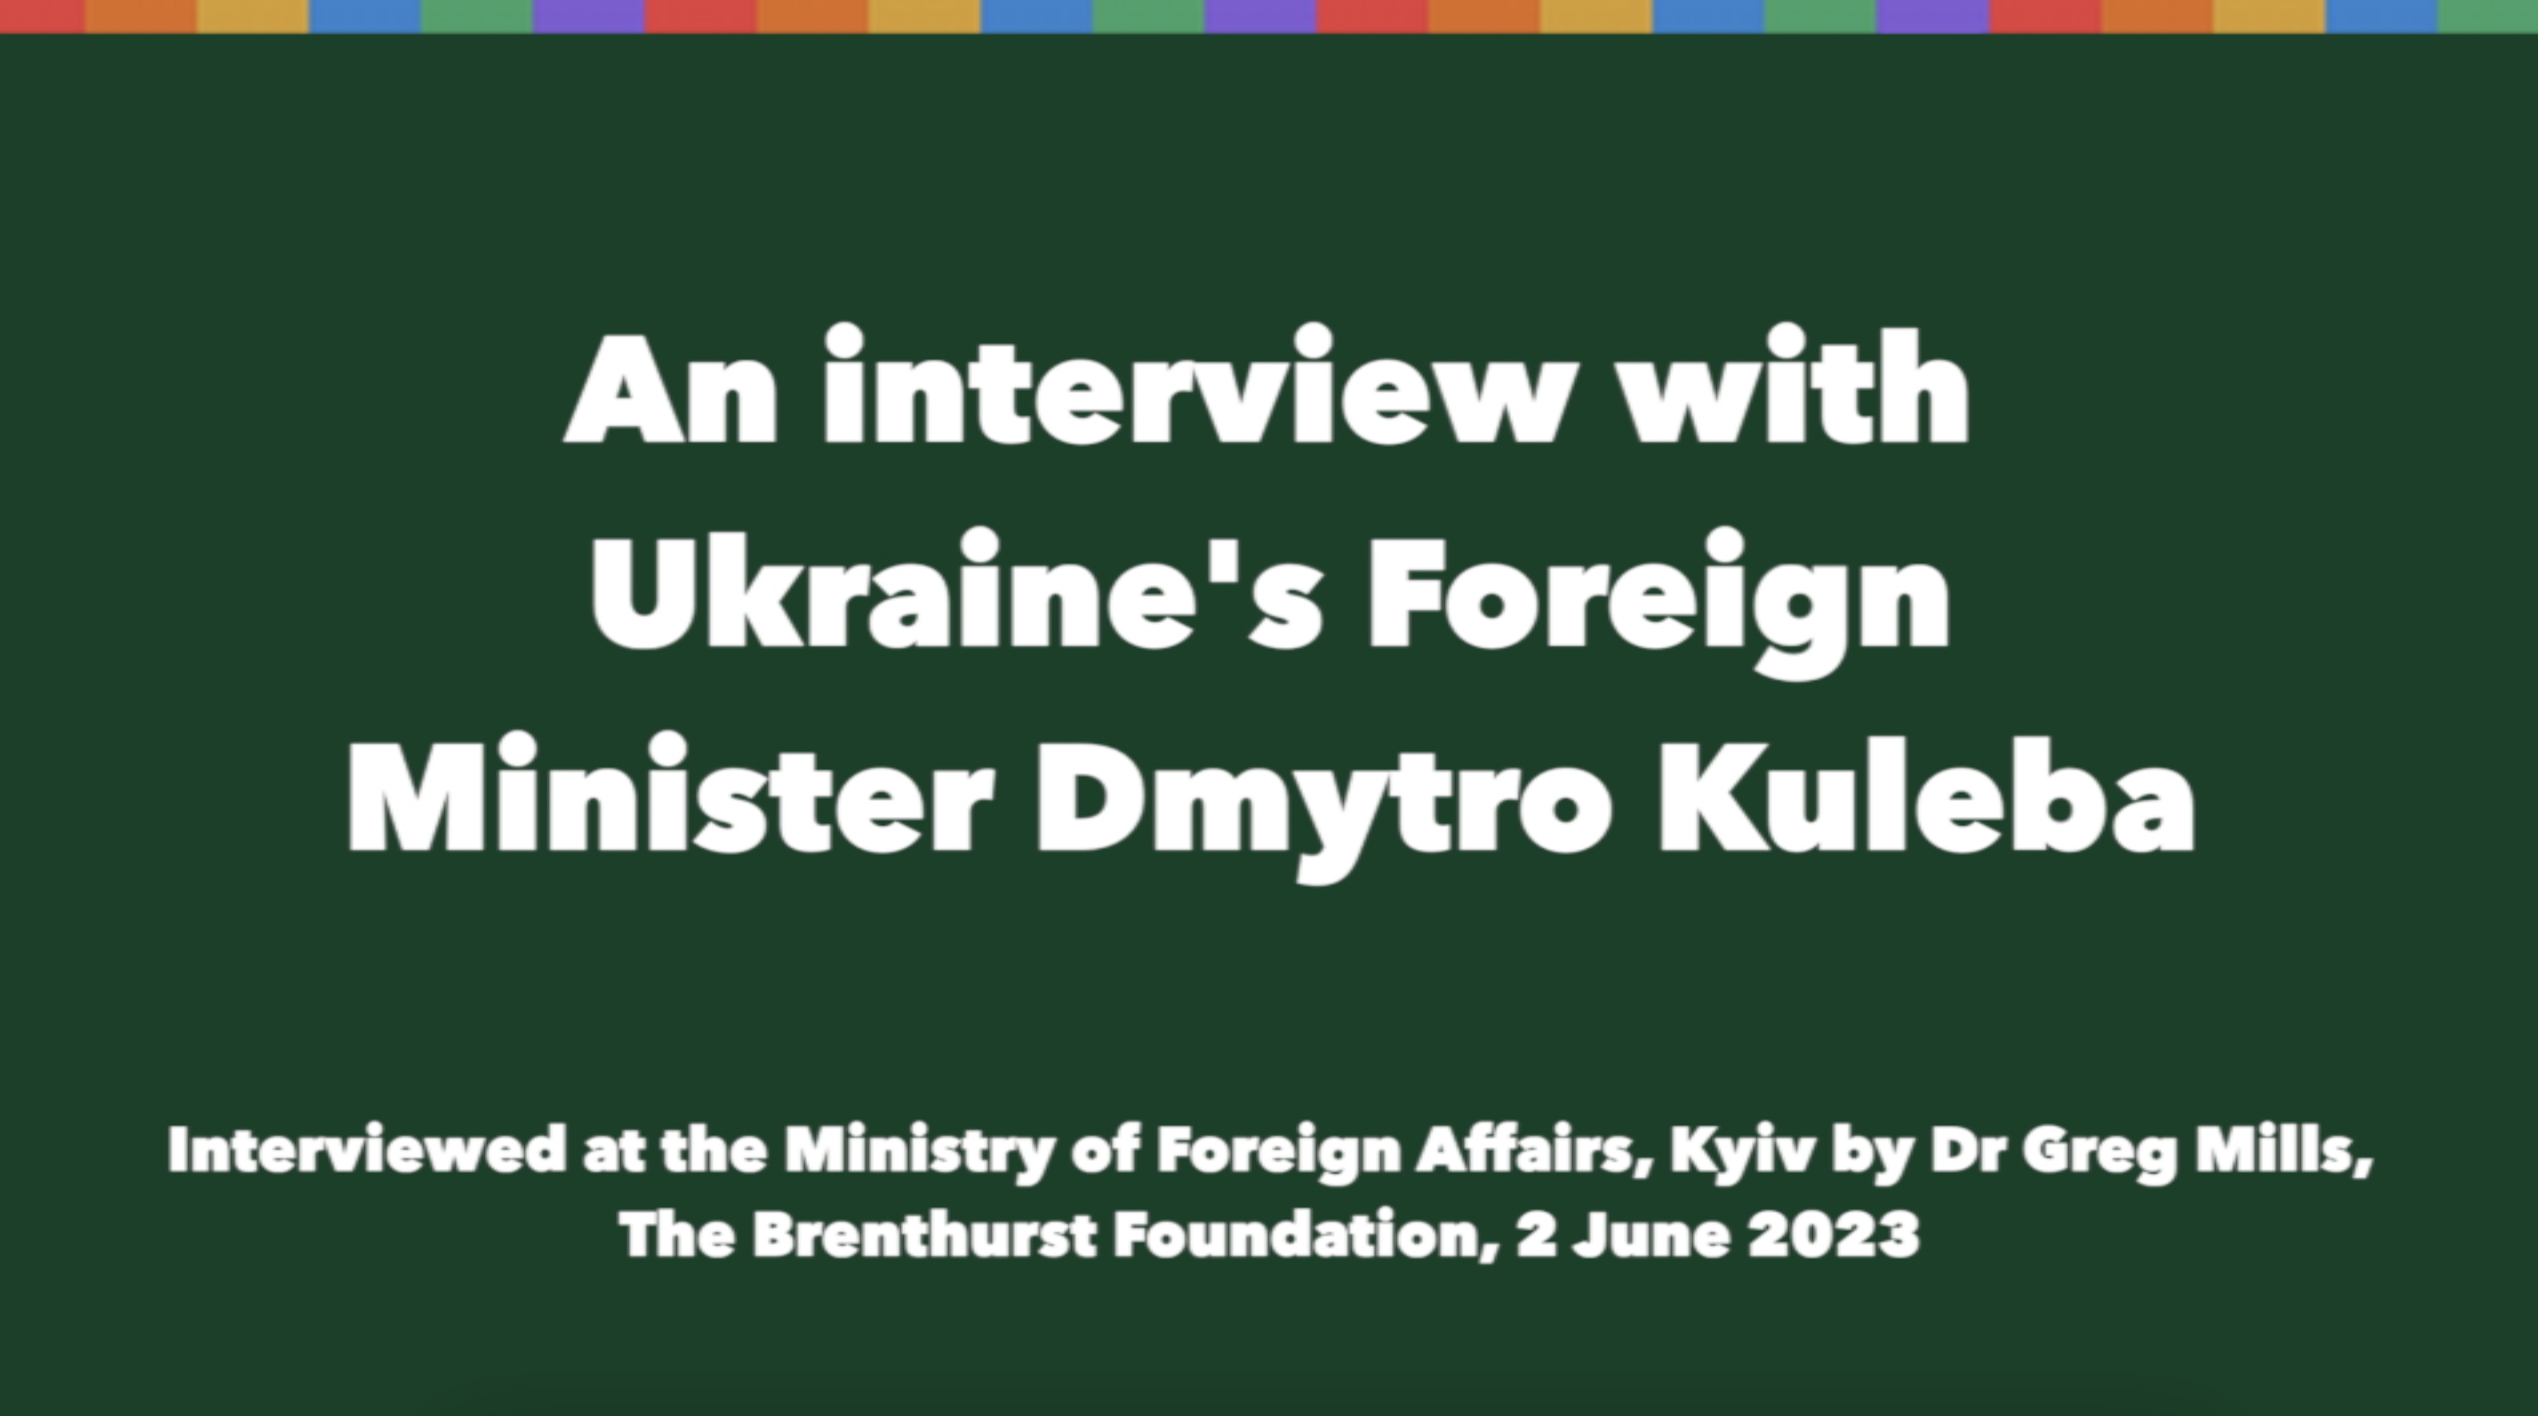 An interview with Ukraine's Foreign Minister Dmytro Kuleba